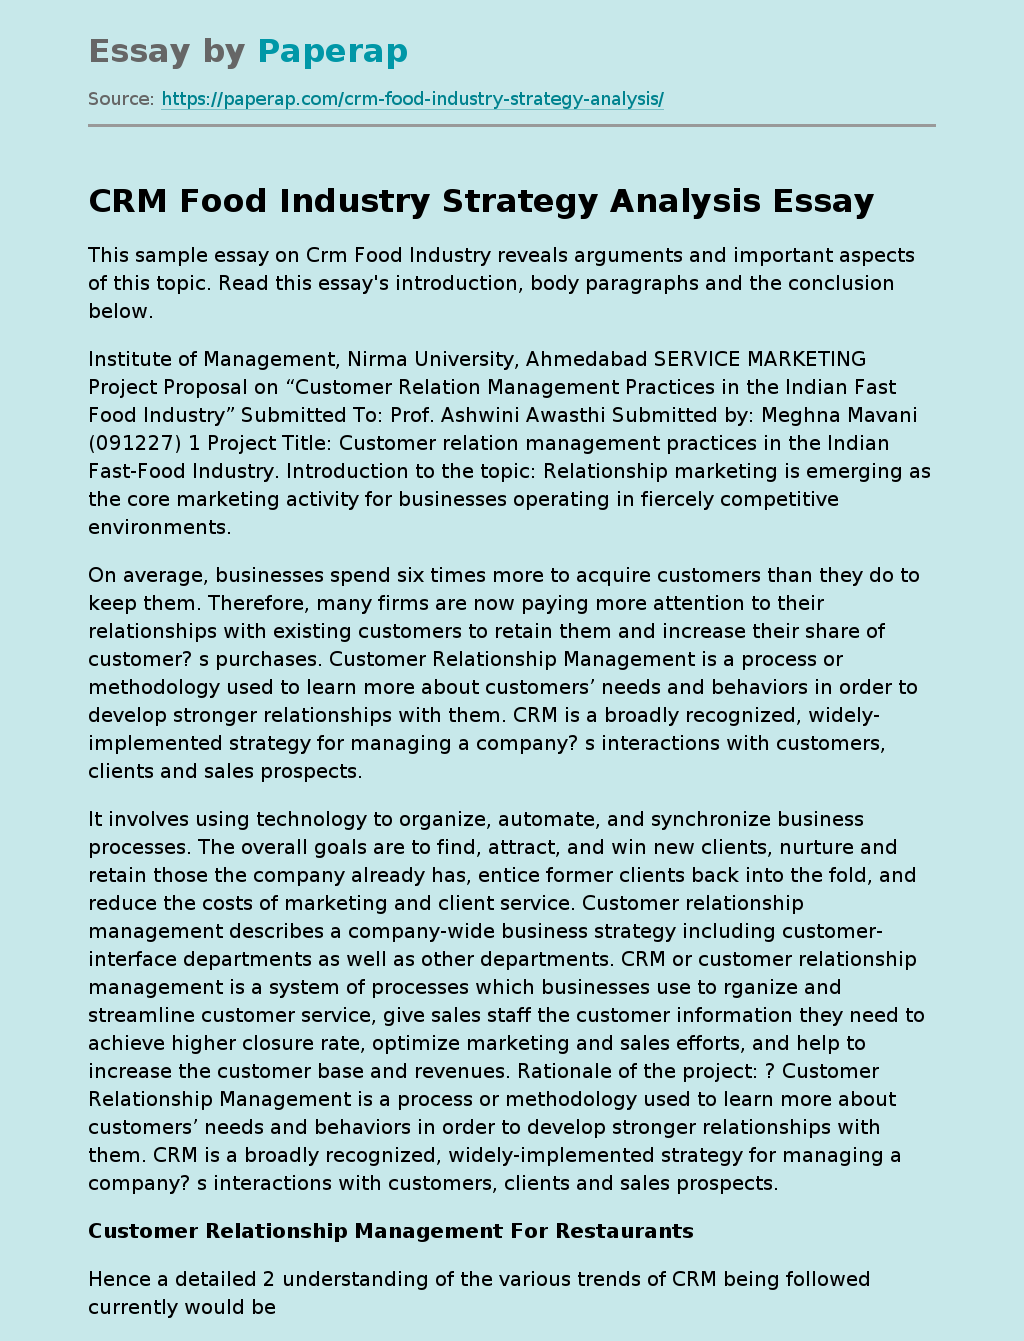 CRM Food Industry Strategy Analysis